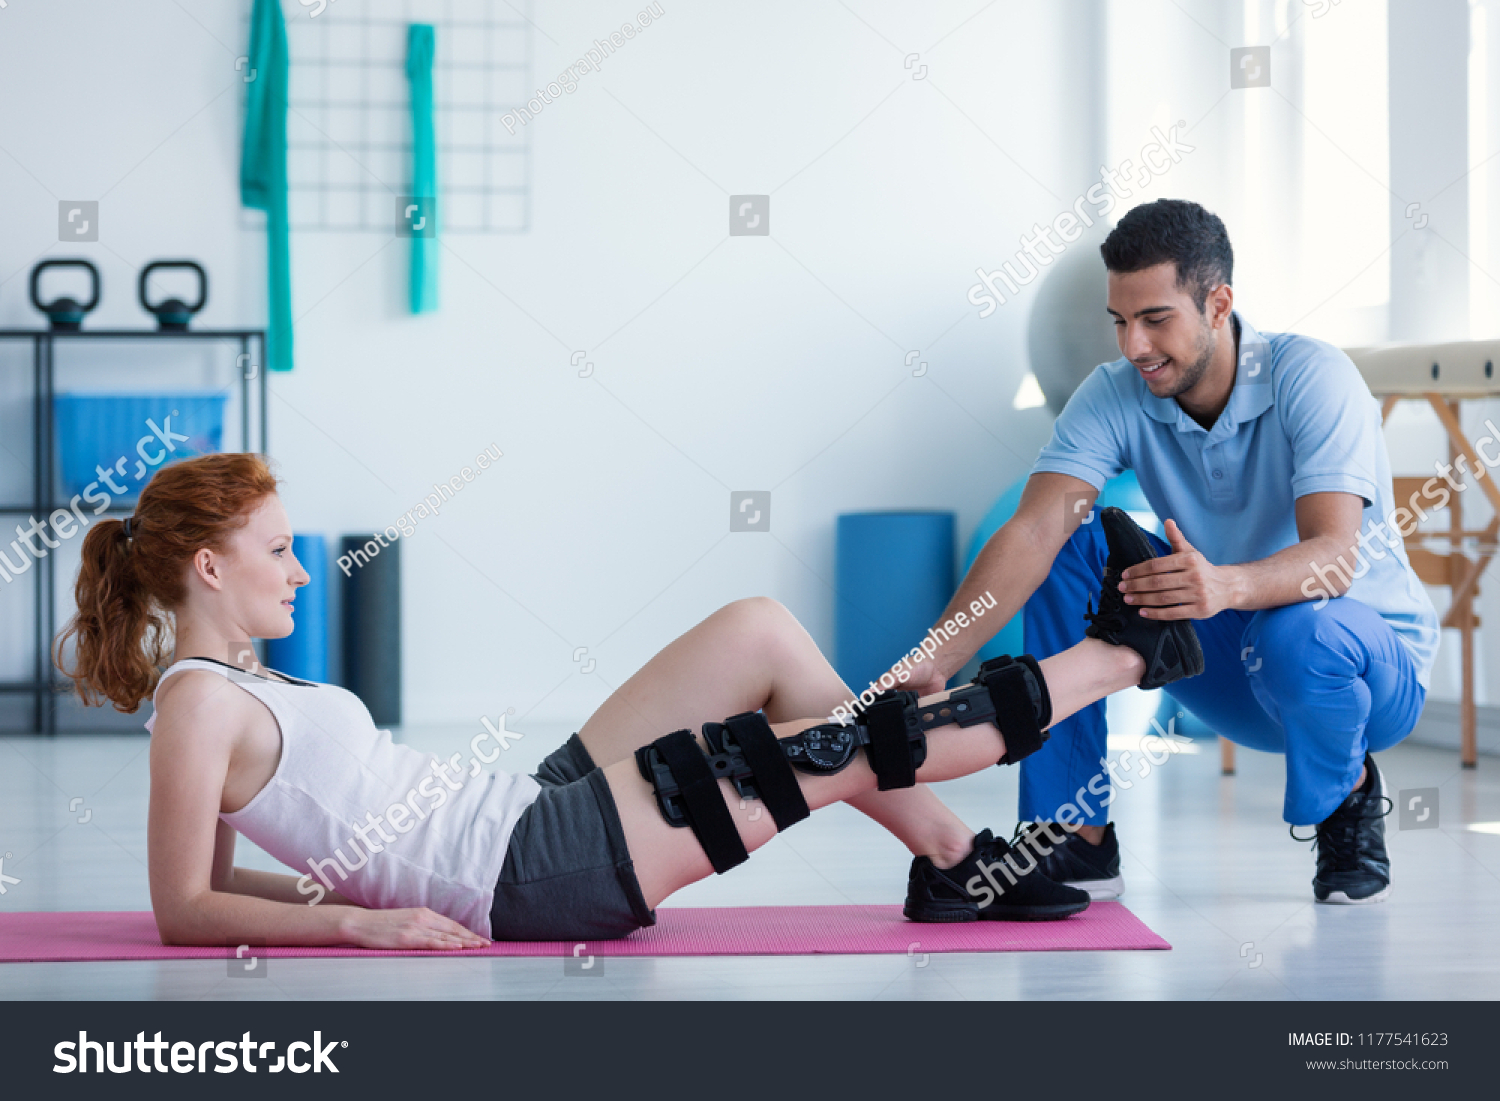 Woman with leg injury on mat and smiling doctor during treatment in the hospital #1177541623